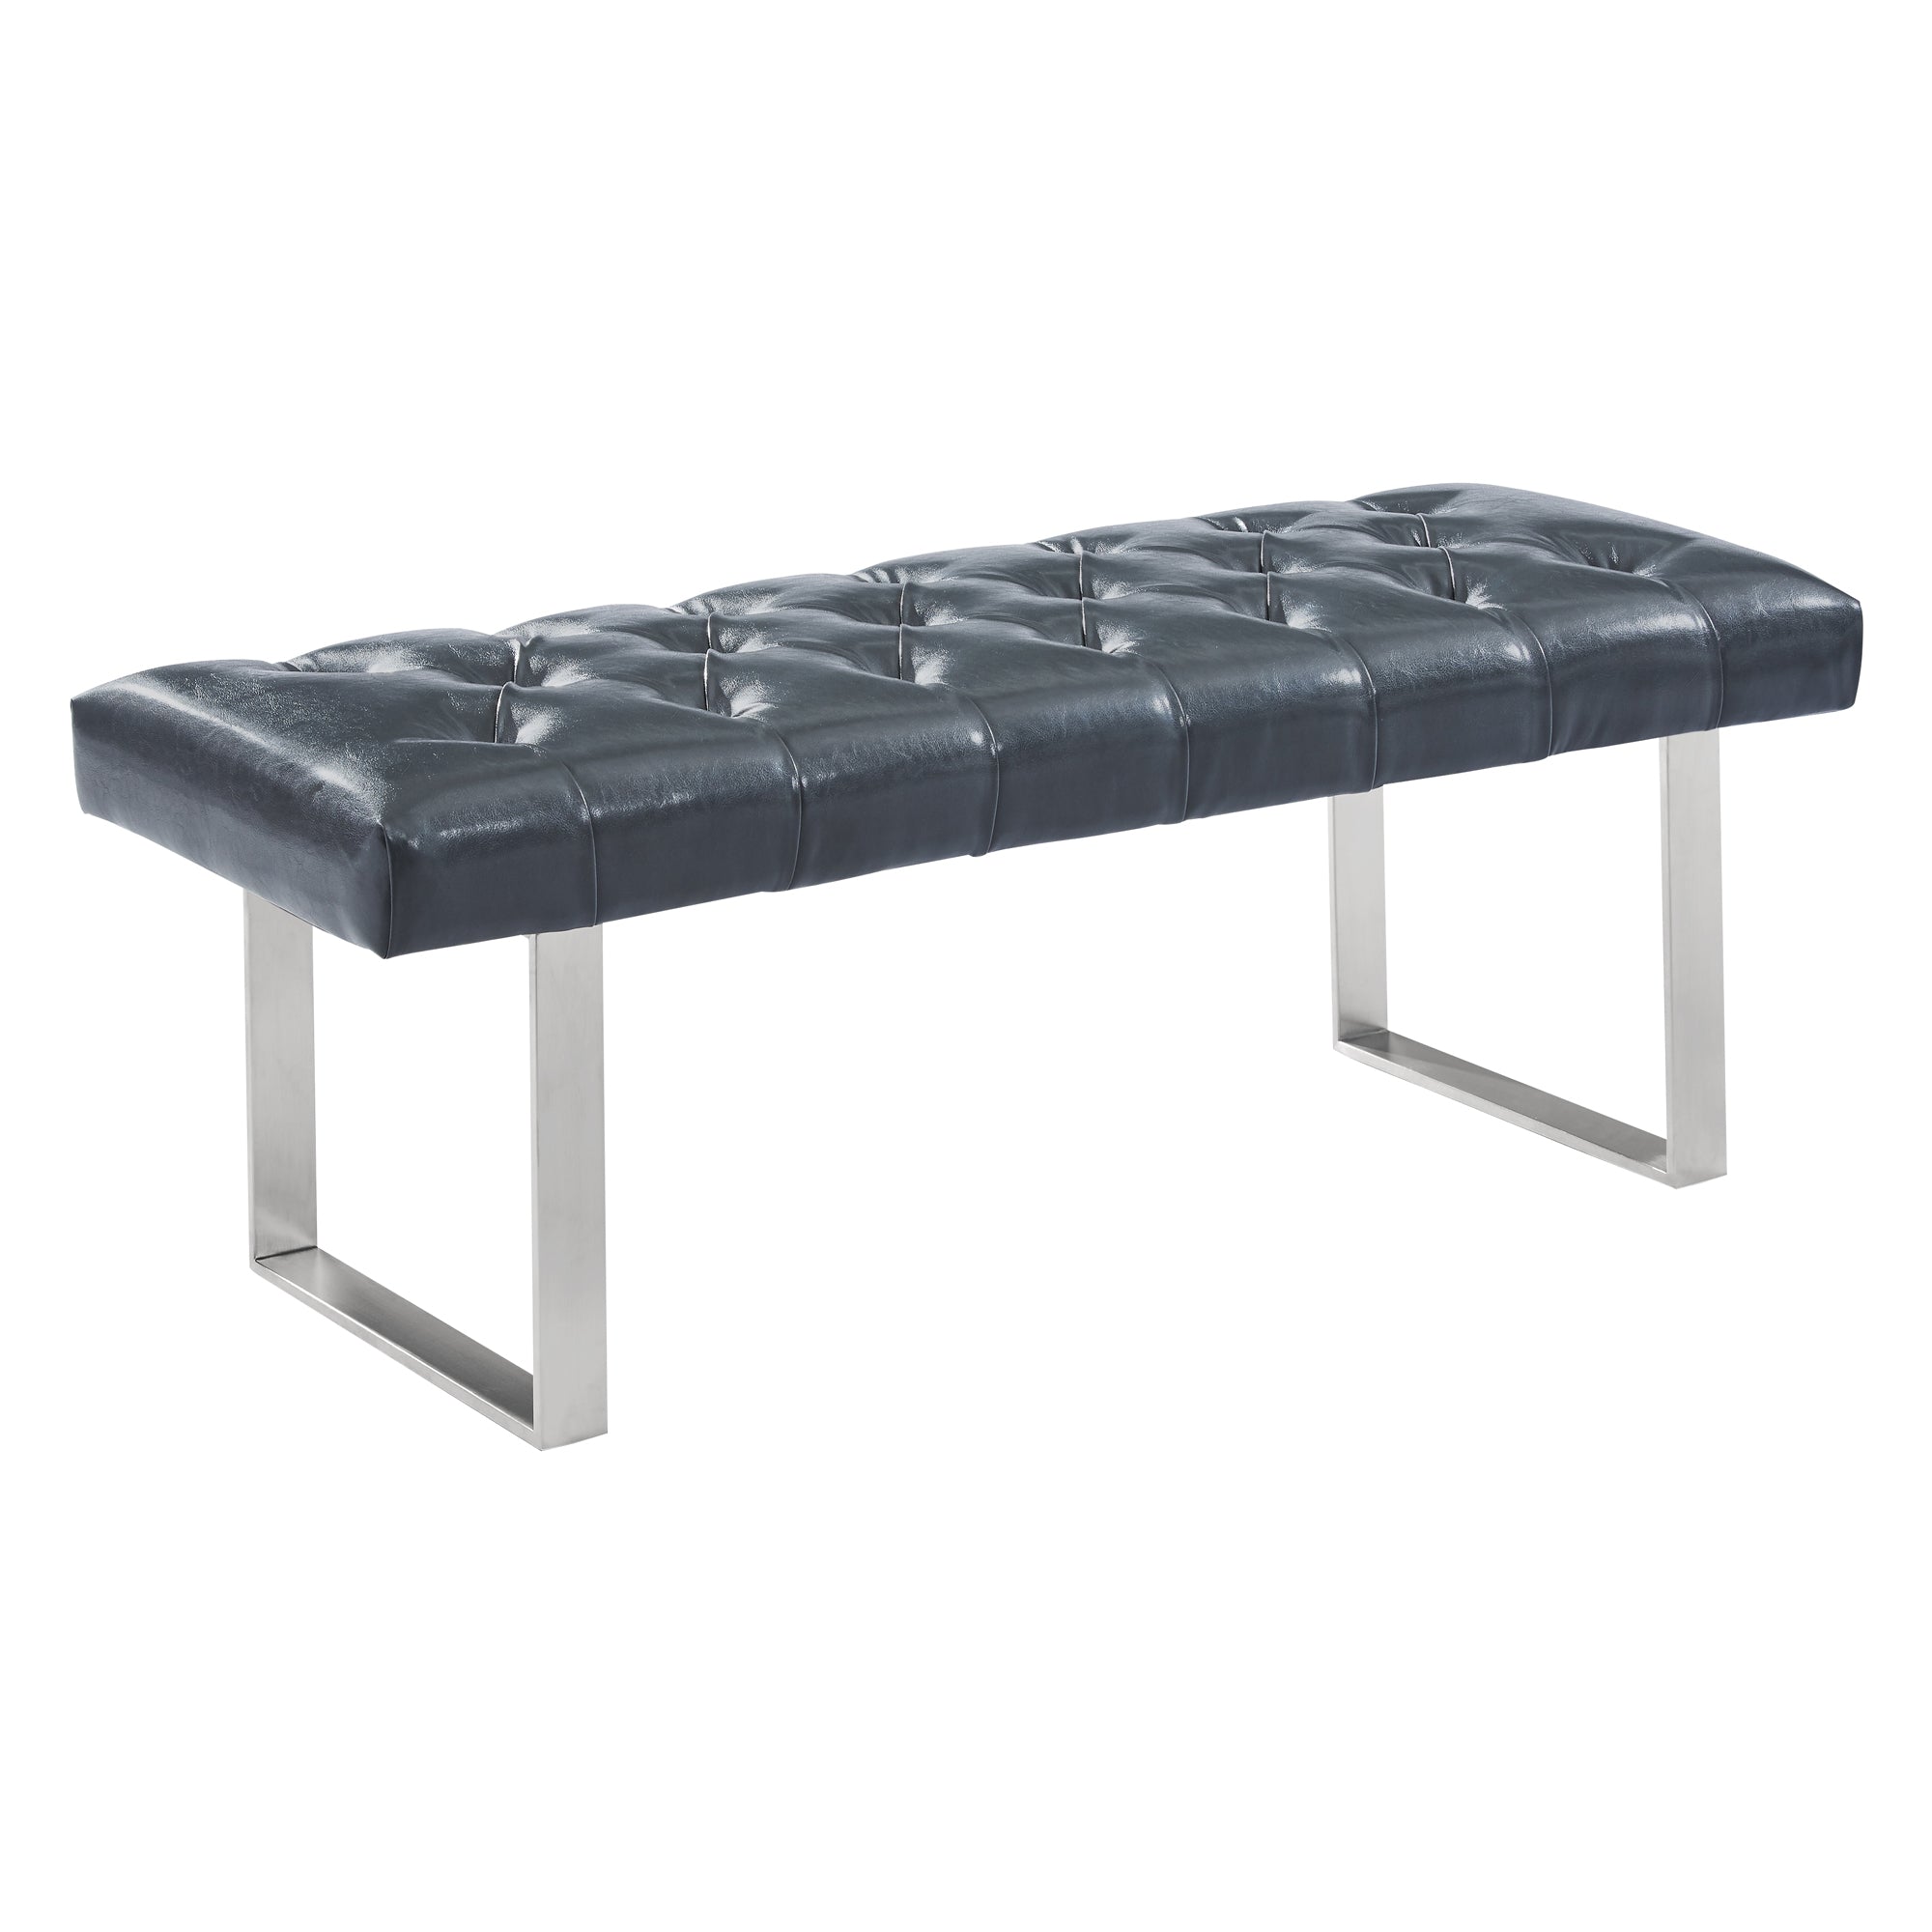 Armen Living Lcplbepugr Plaza Contemporary Bench In Grey Faux Leather And Brushed Stainless Steel Finish